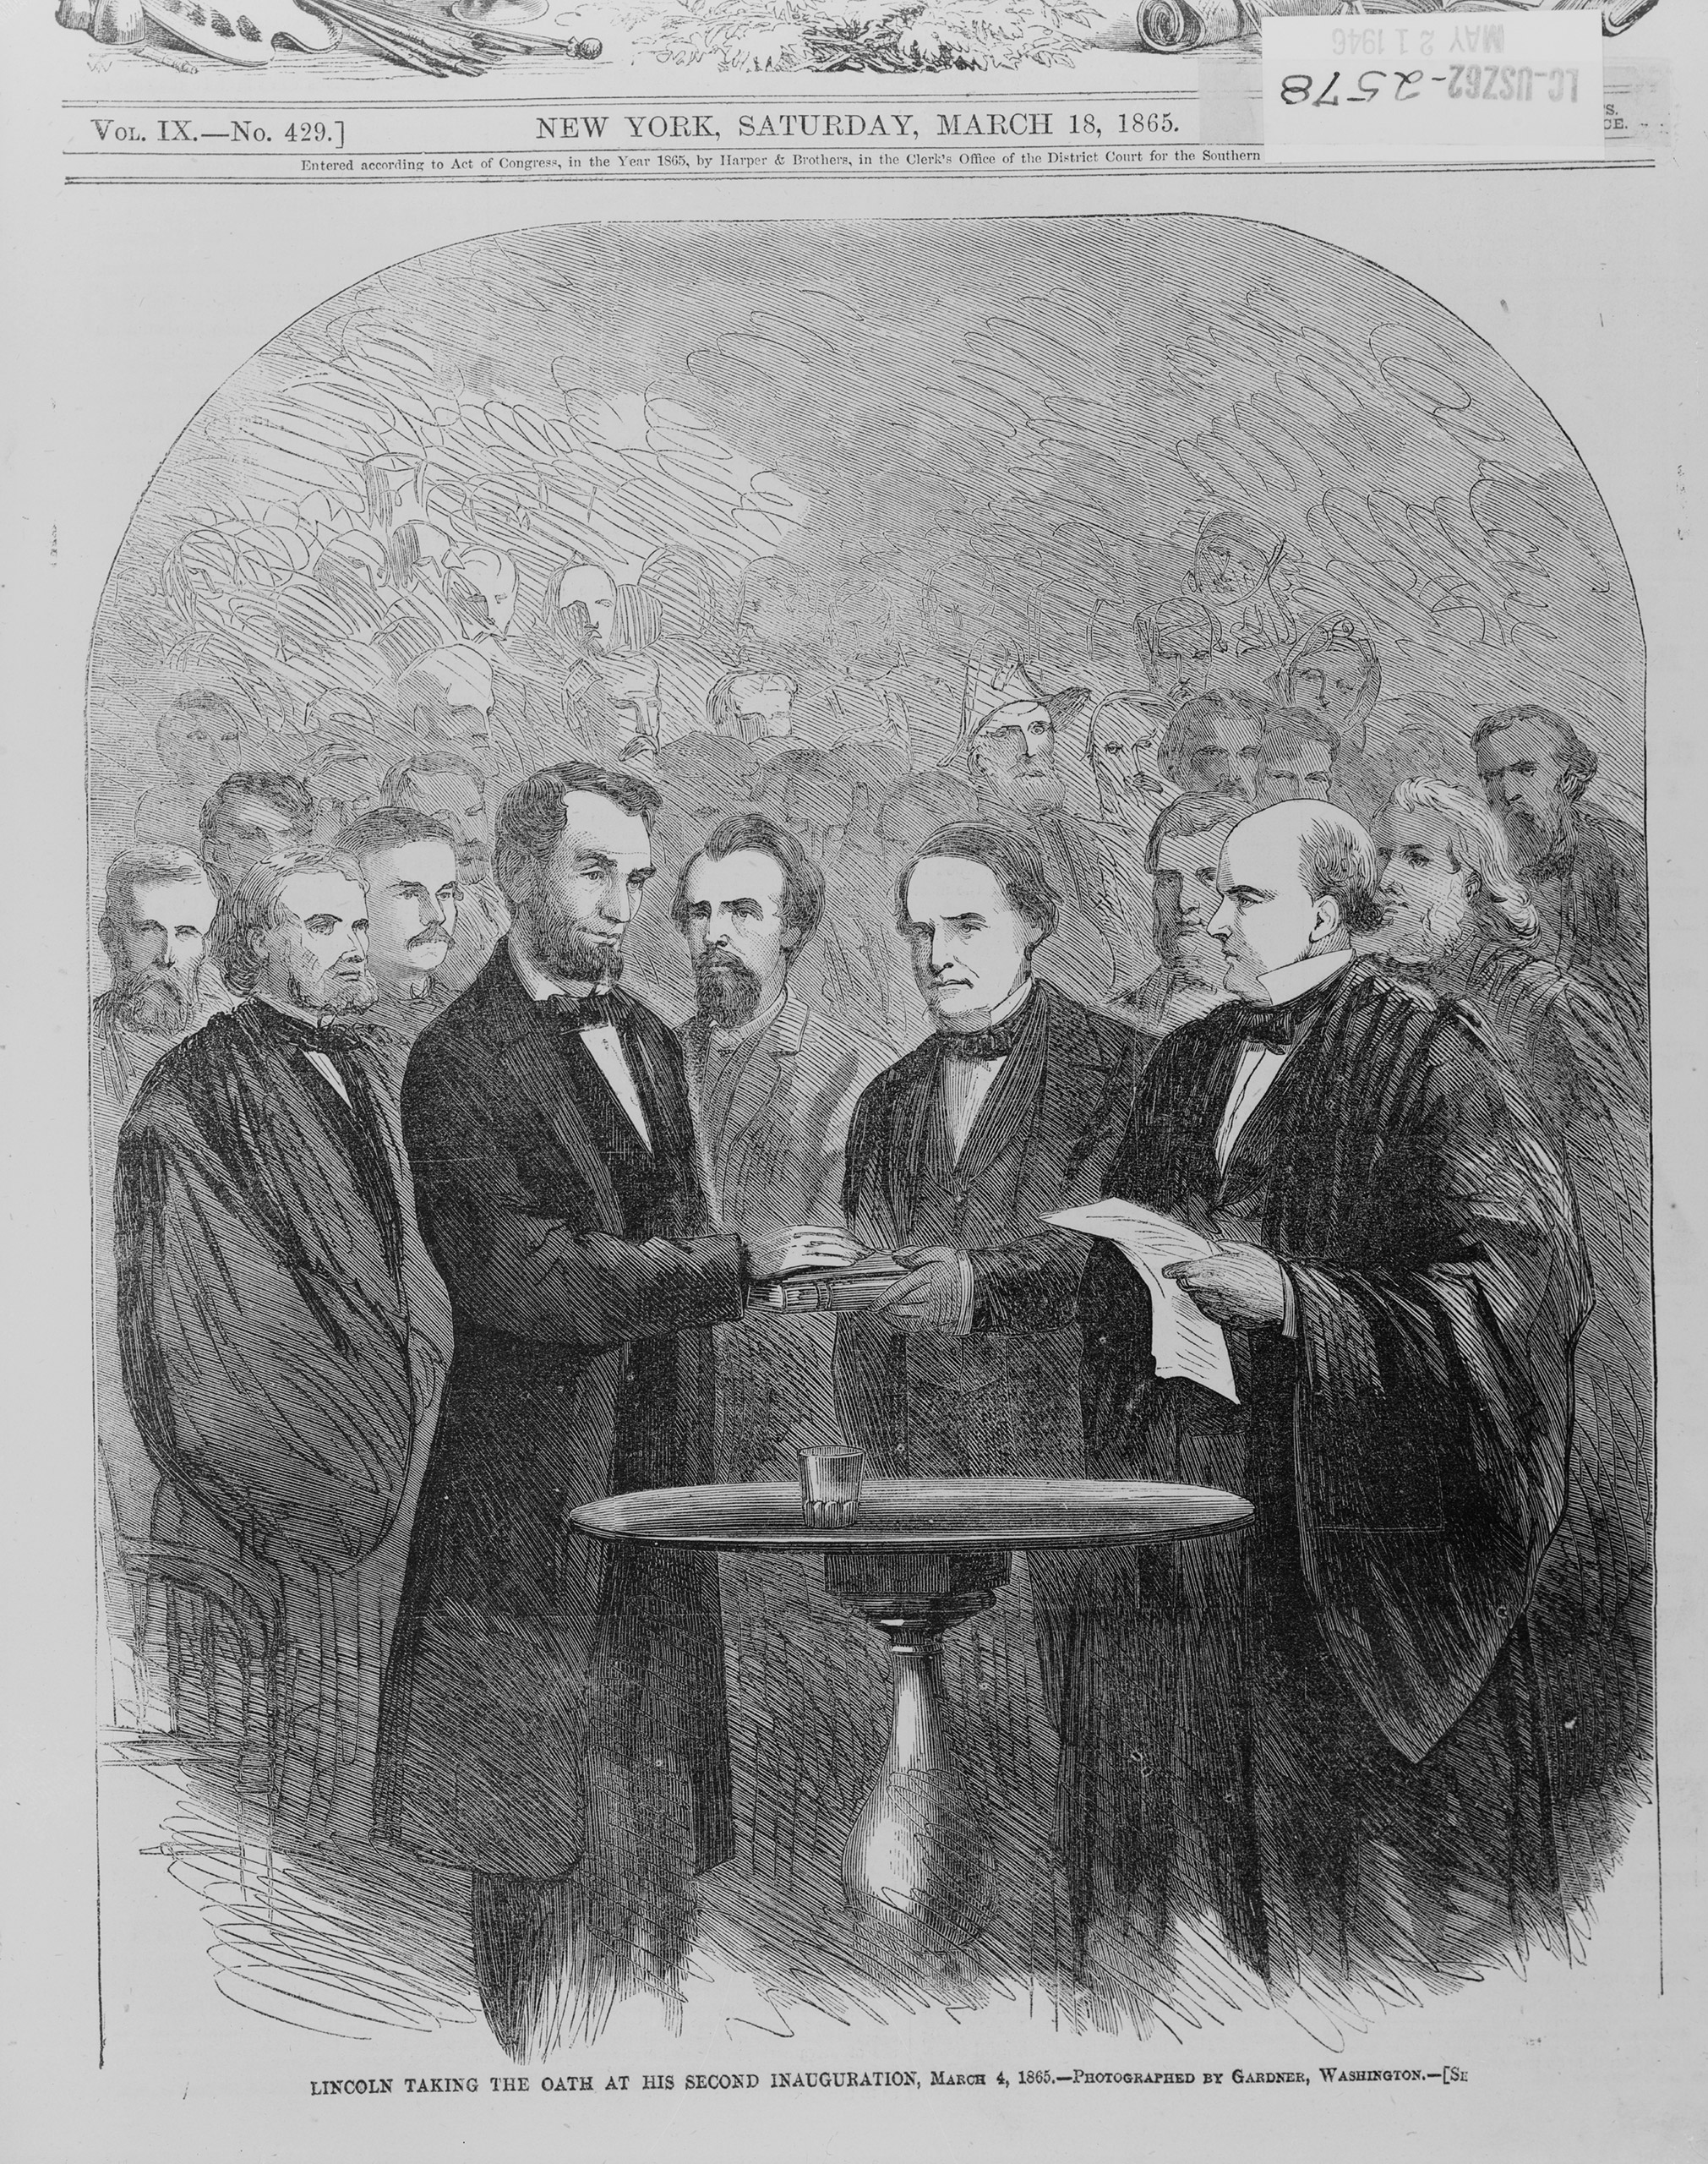 Abraham Lincoln taking the oath at his second inauguration, March 4, 1865.